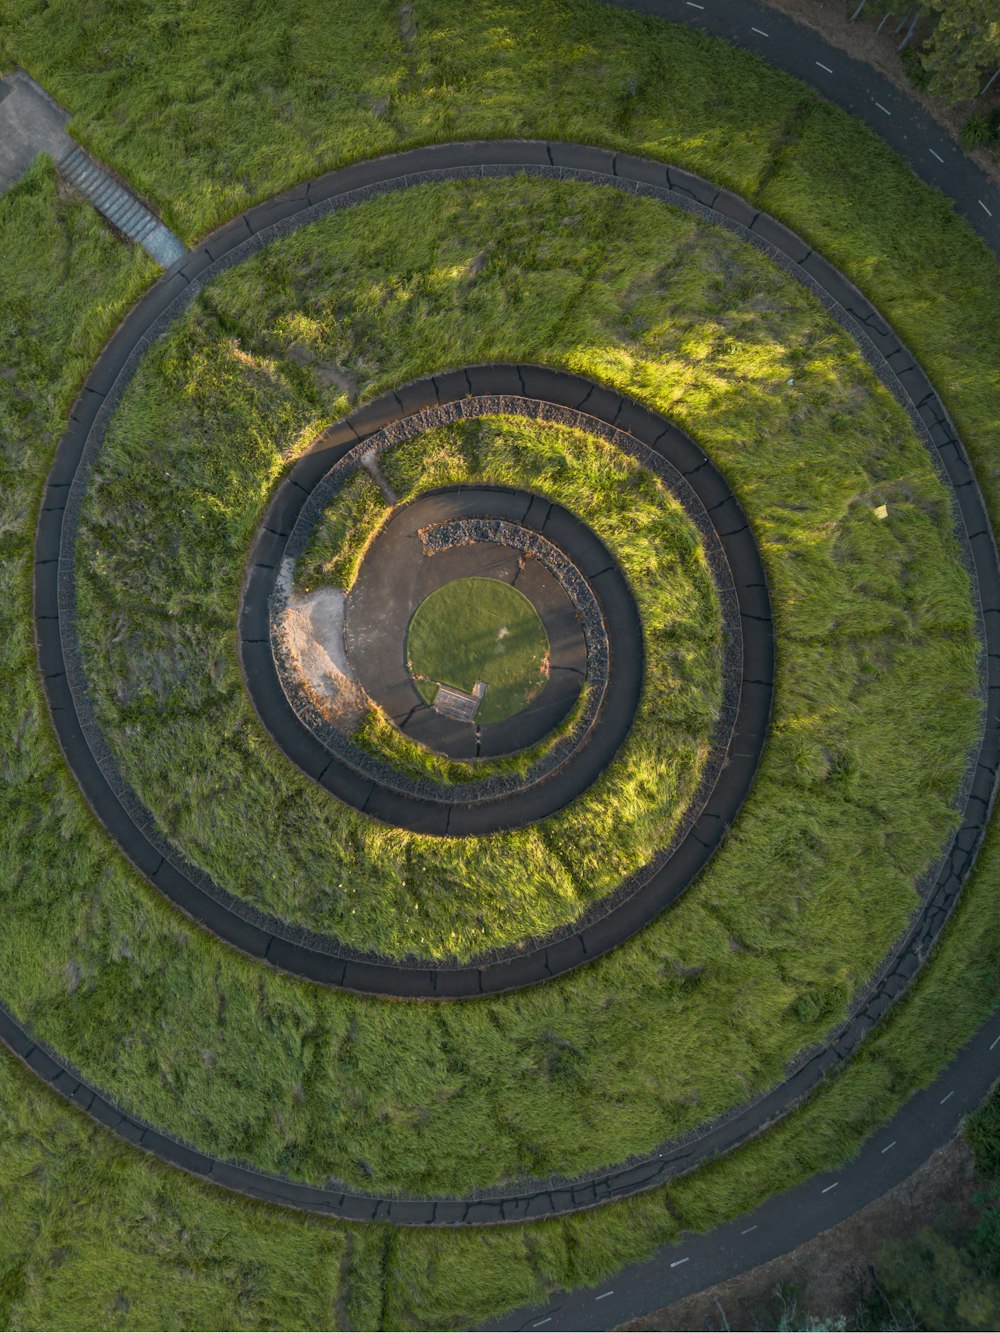 an aerial view of a circular grassy area